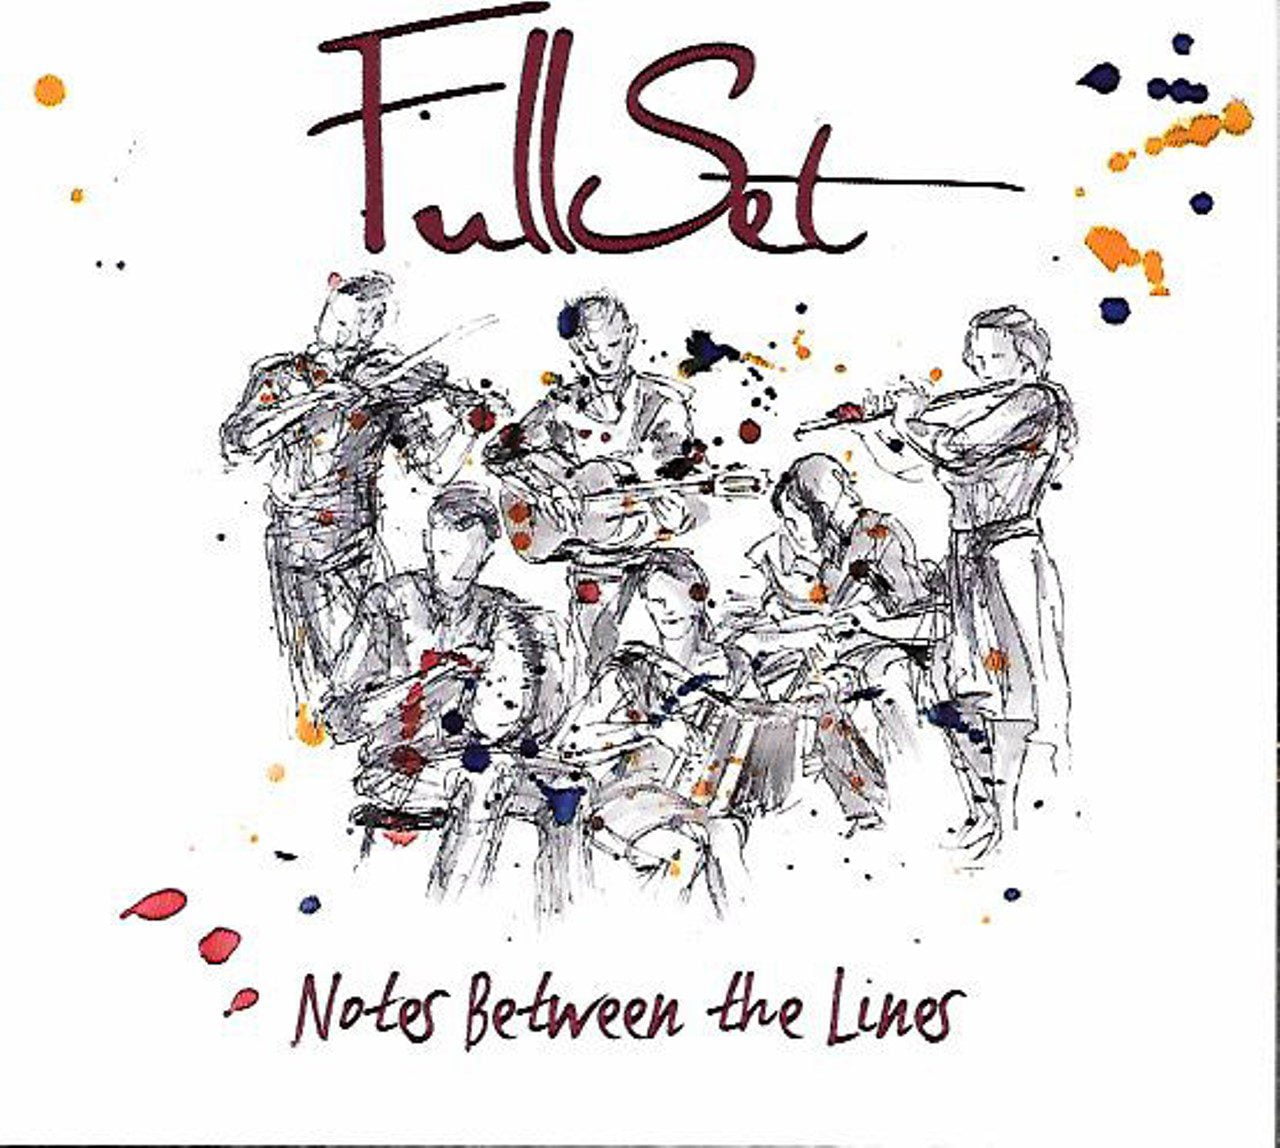 Full Set – Notes Between The Lines cover album